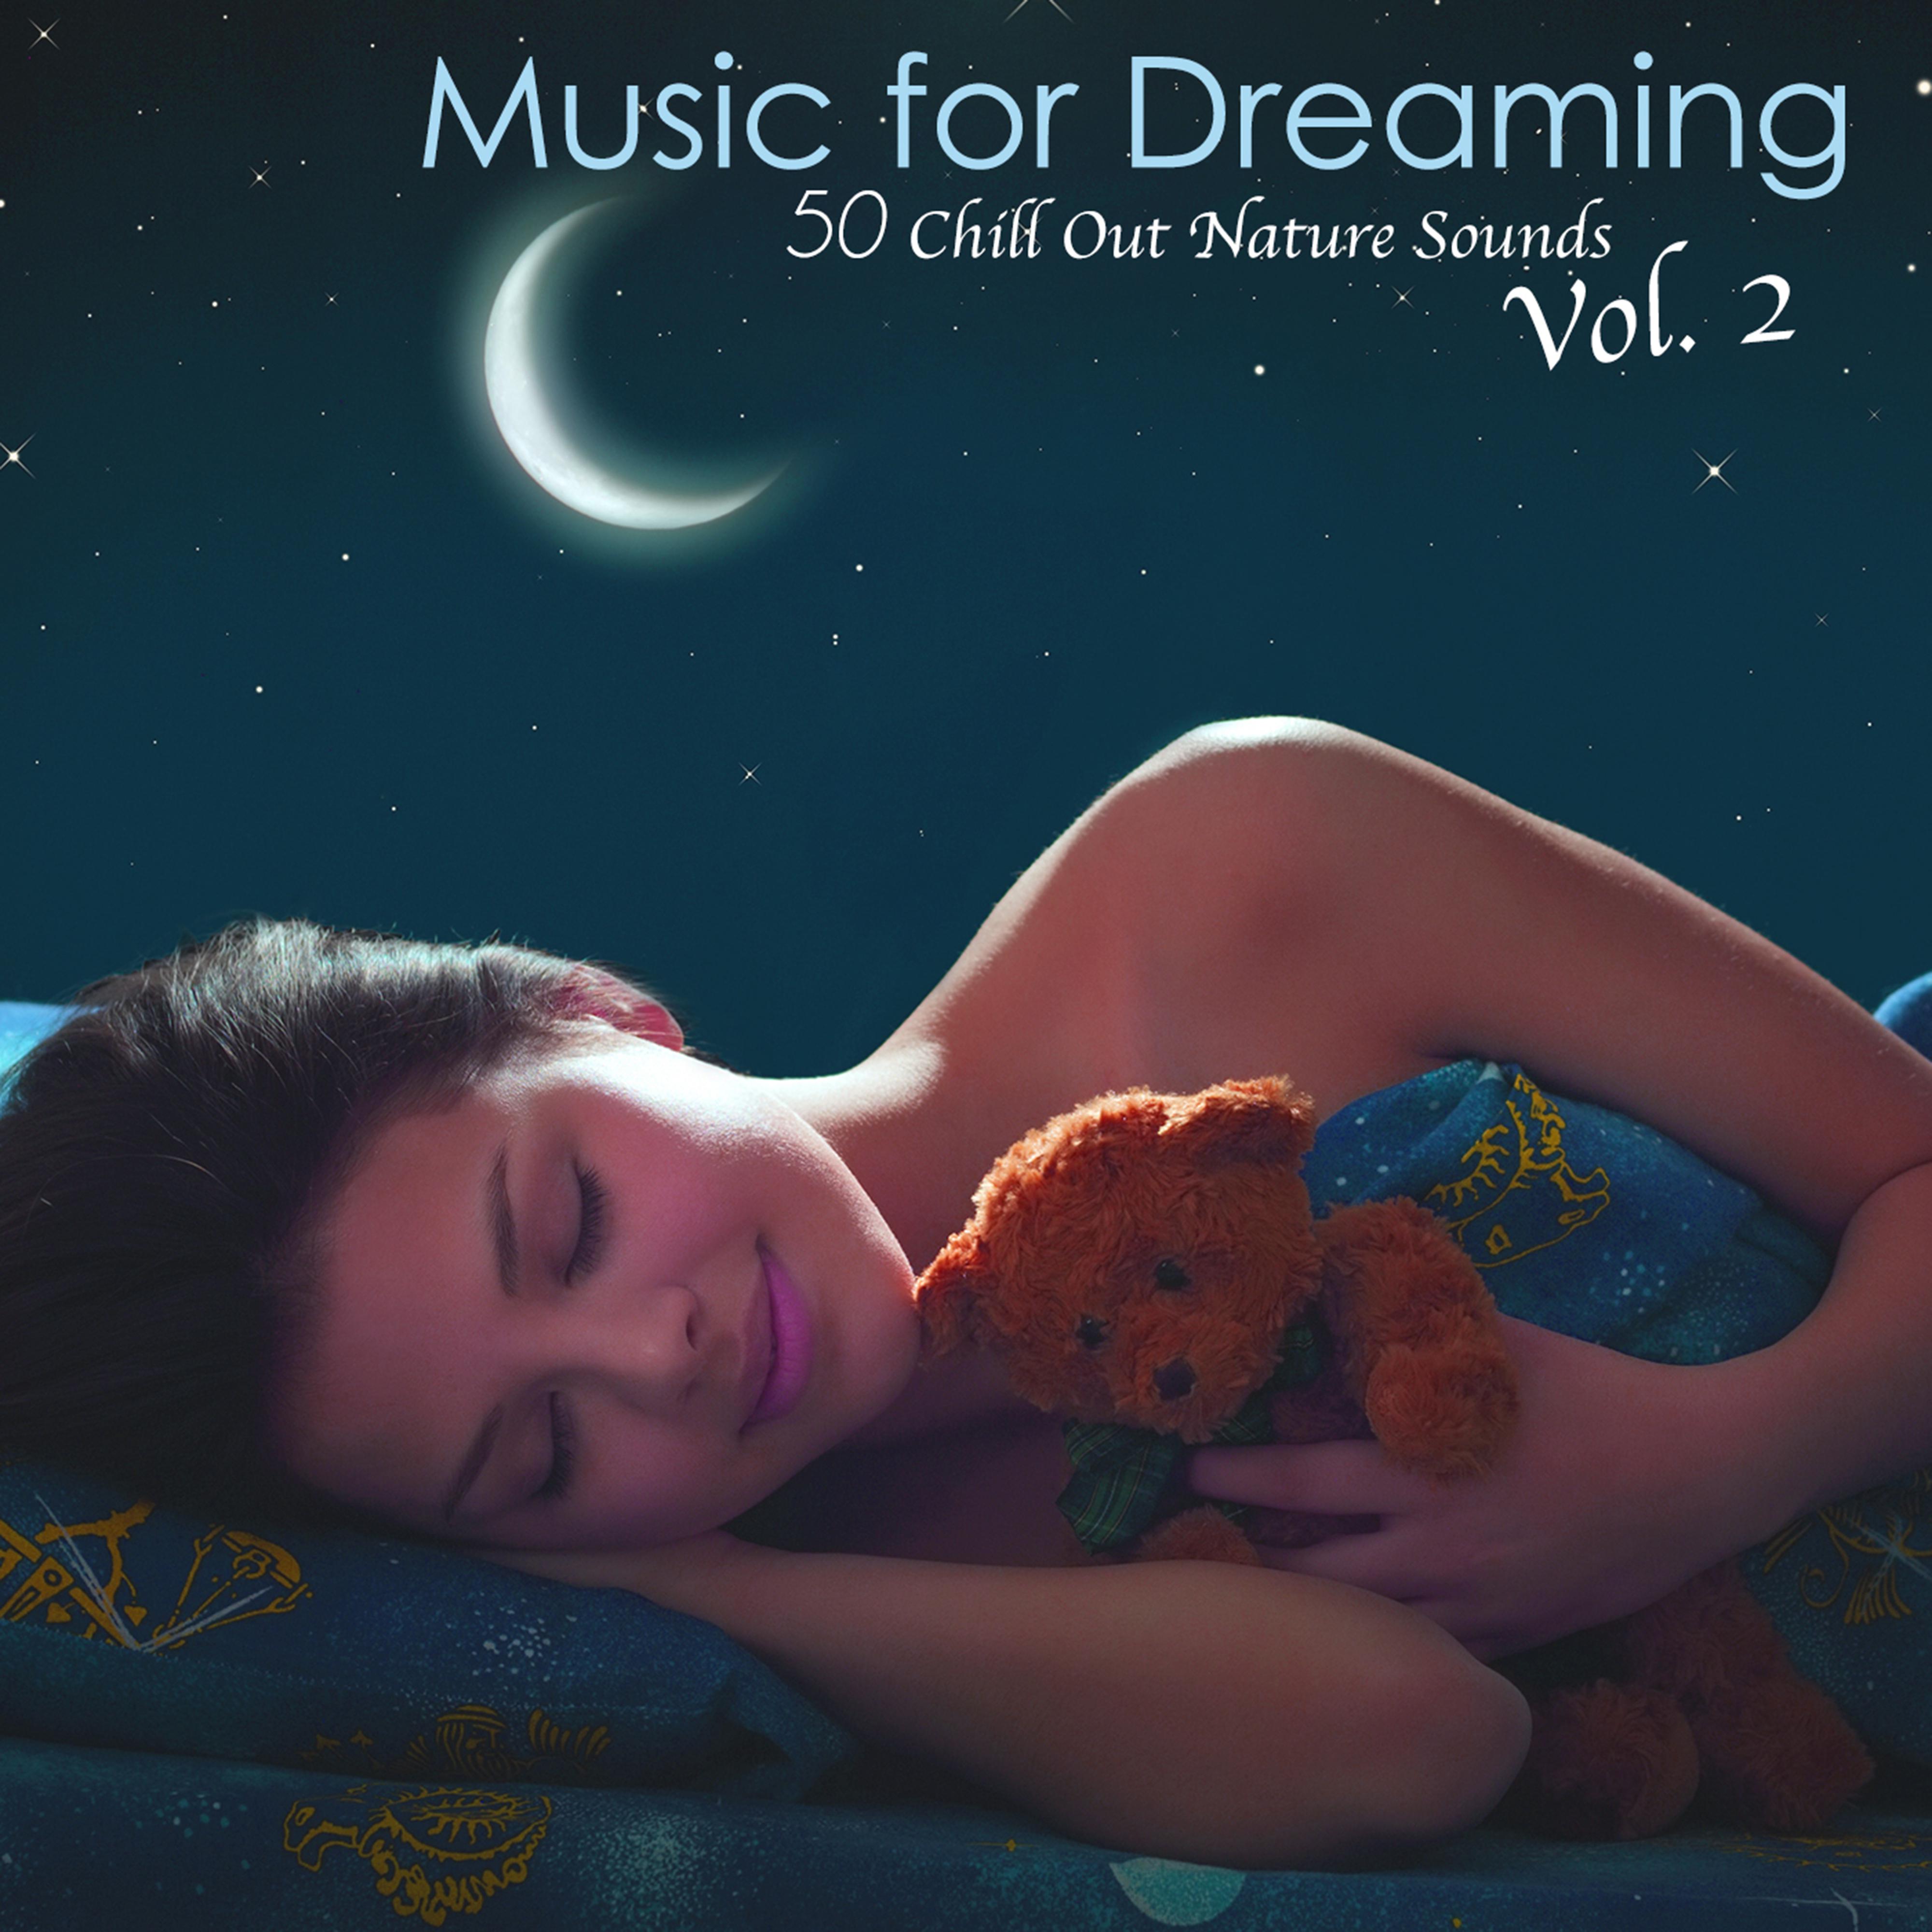 Music for Dreaming, Vol. 2 - 50 Chill Out Nature Sounds Relaxation Meditation Music, Chillax New Age Asian World Music 4 Tranquil Moments & Sleep Time